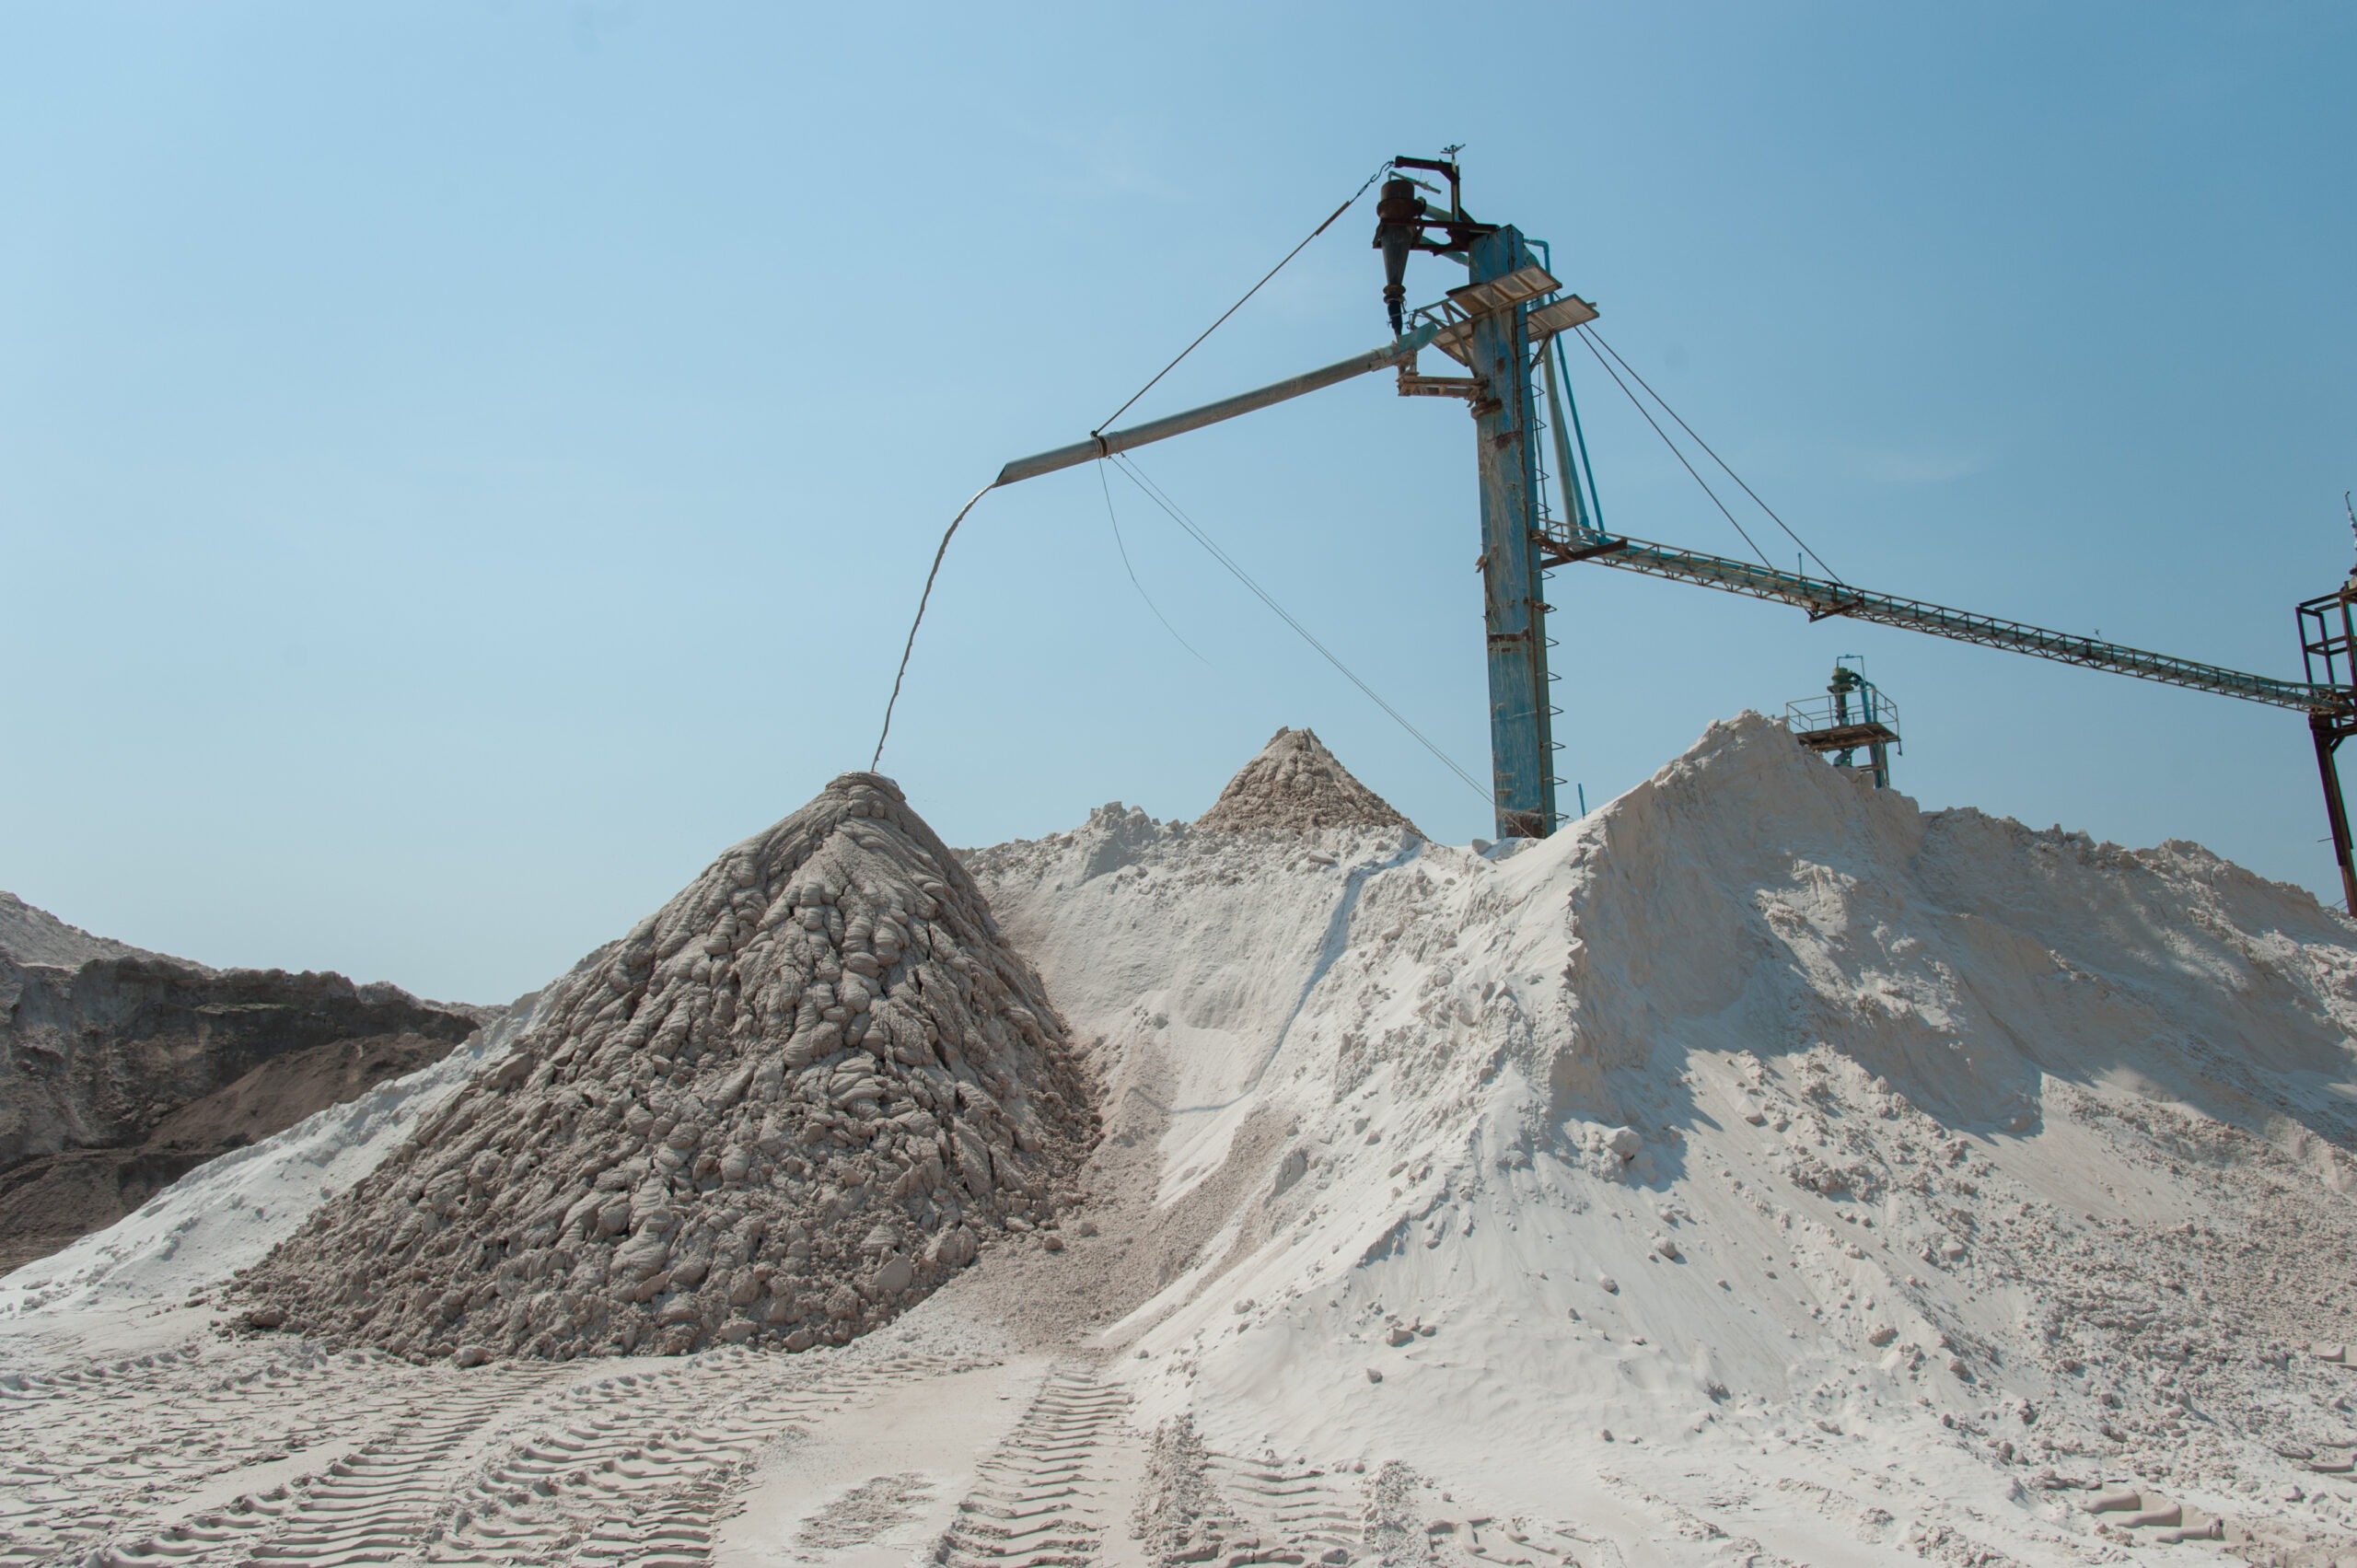 Mining the benefits: Upgrading solids-handling slurry pumps at silica proppant mining facility